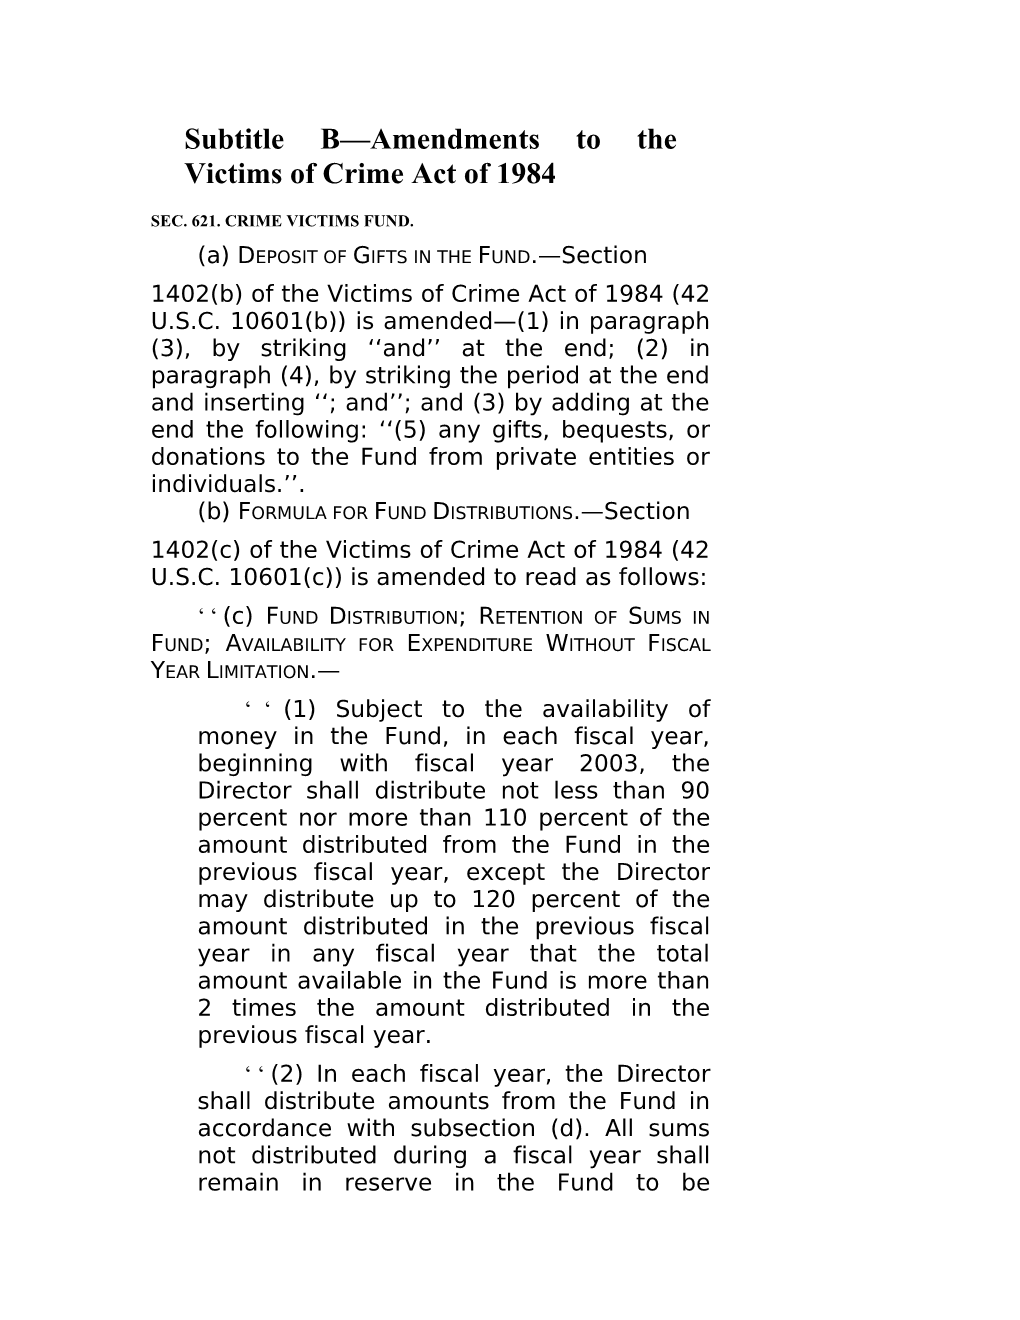 Subtitle B Amendments to the Victims of Crime Act of 1984